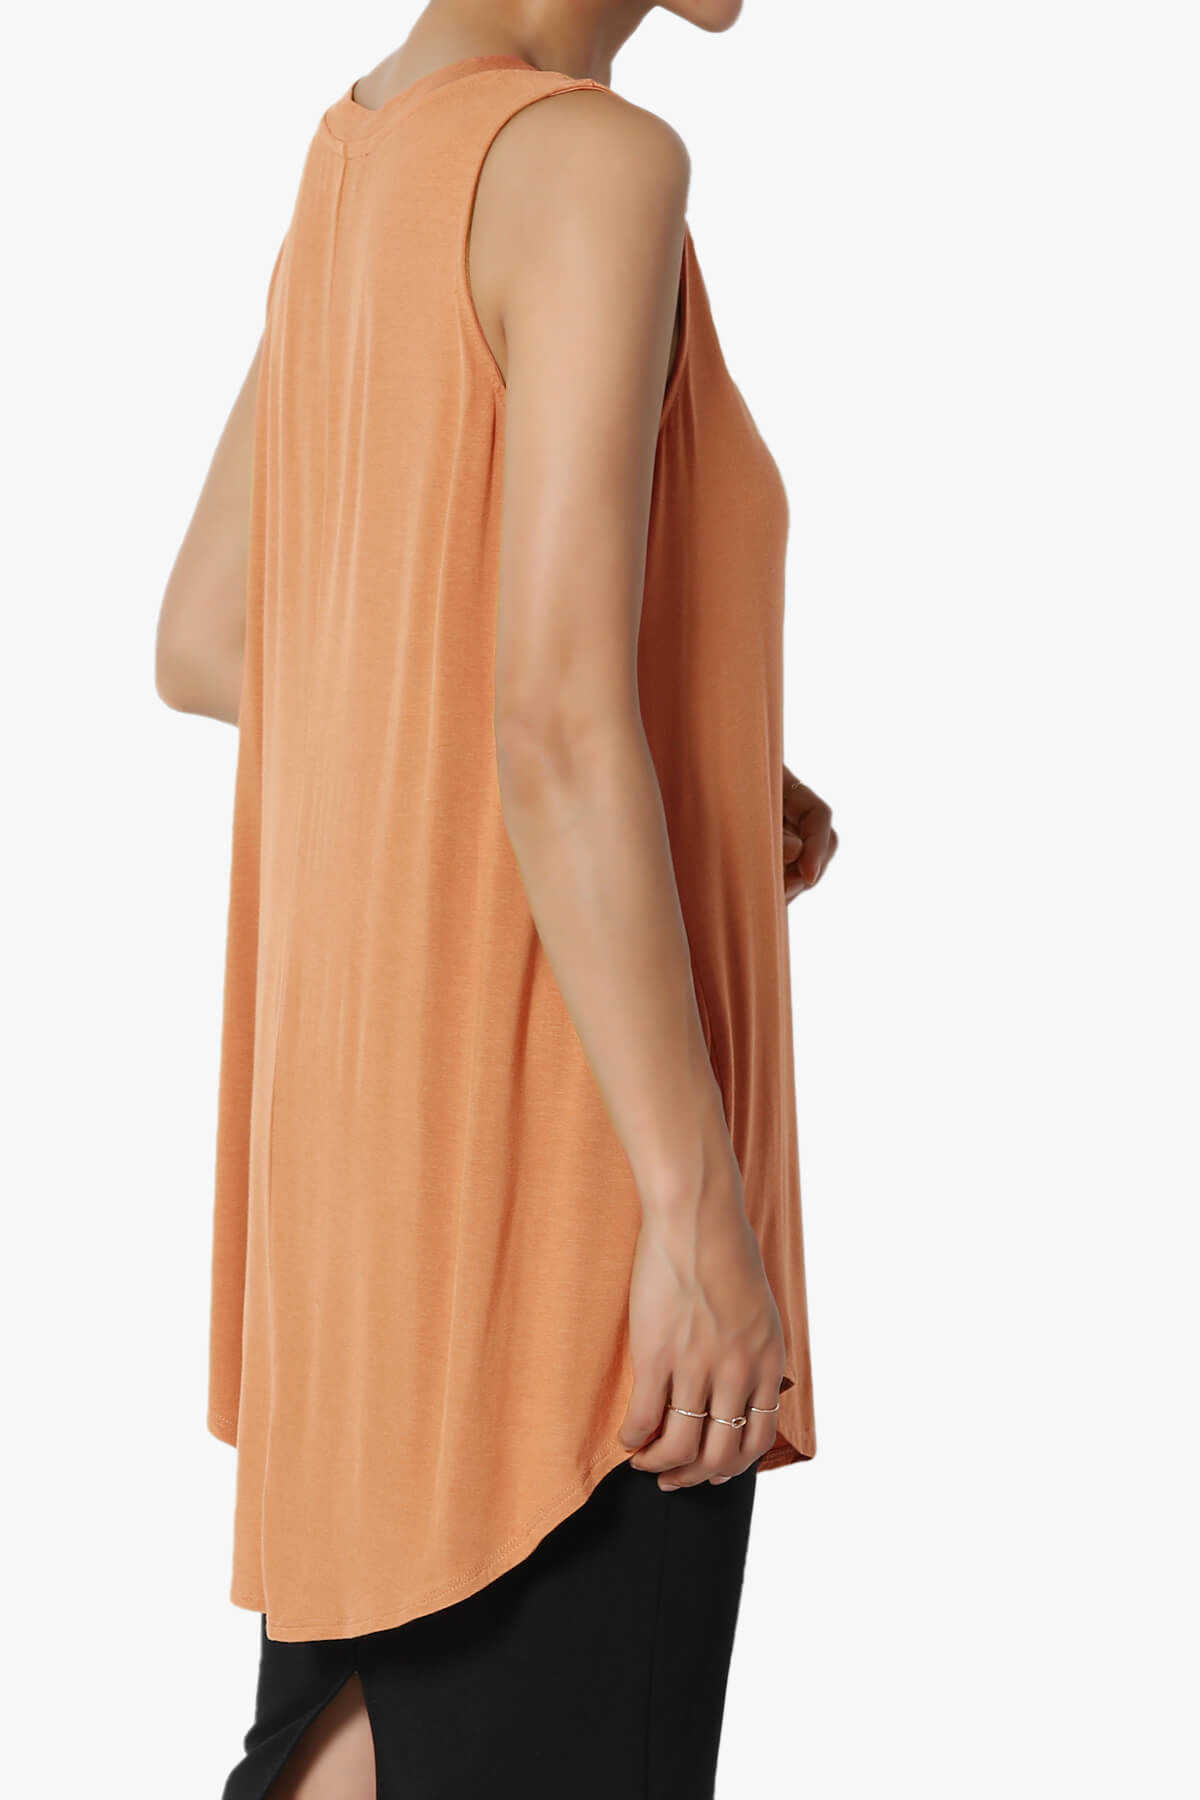 Load image into Gallery viewer, Myles Sleeveless V-Neck Luxe Jersey Top BUTTER ORANGE_4
